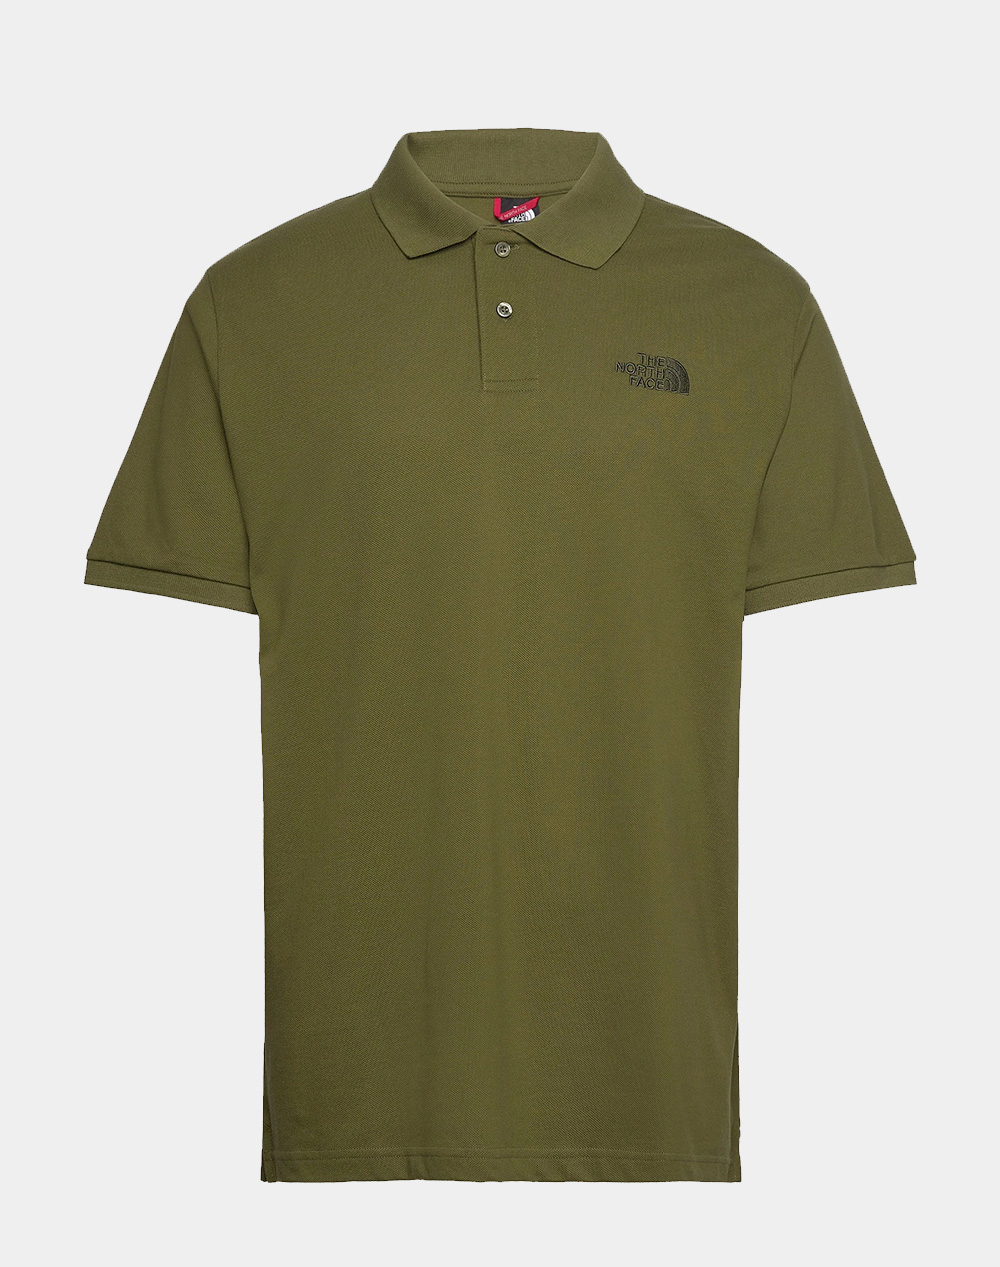 THE NORTH FACE M POLO PIQUET NF00CG71-NFPIB Olive 3820ATNFA3410002_XR28475